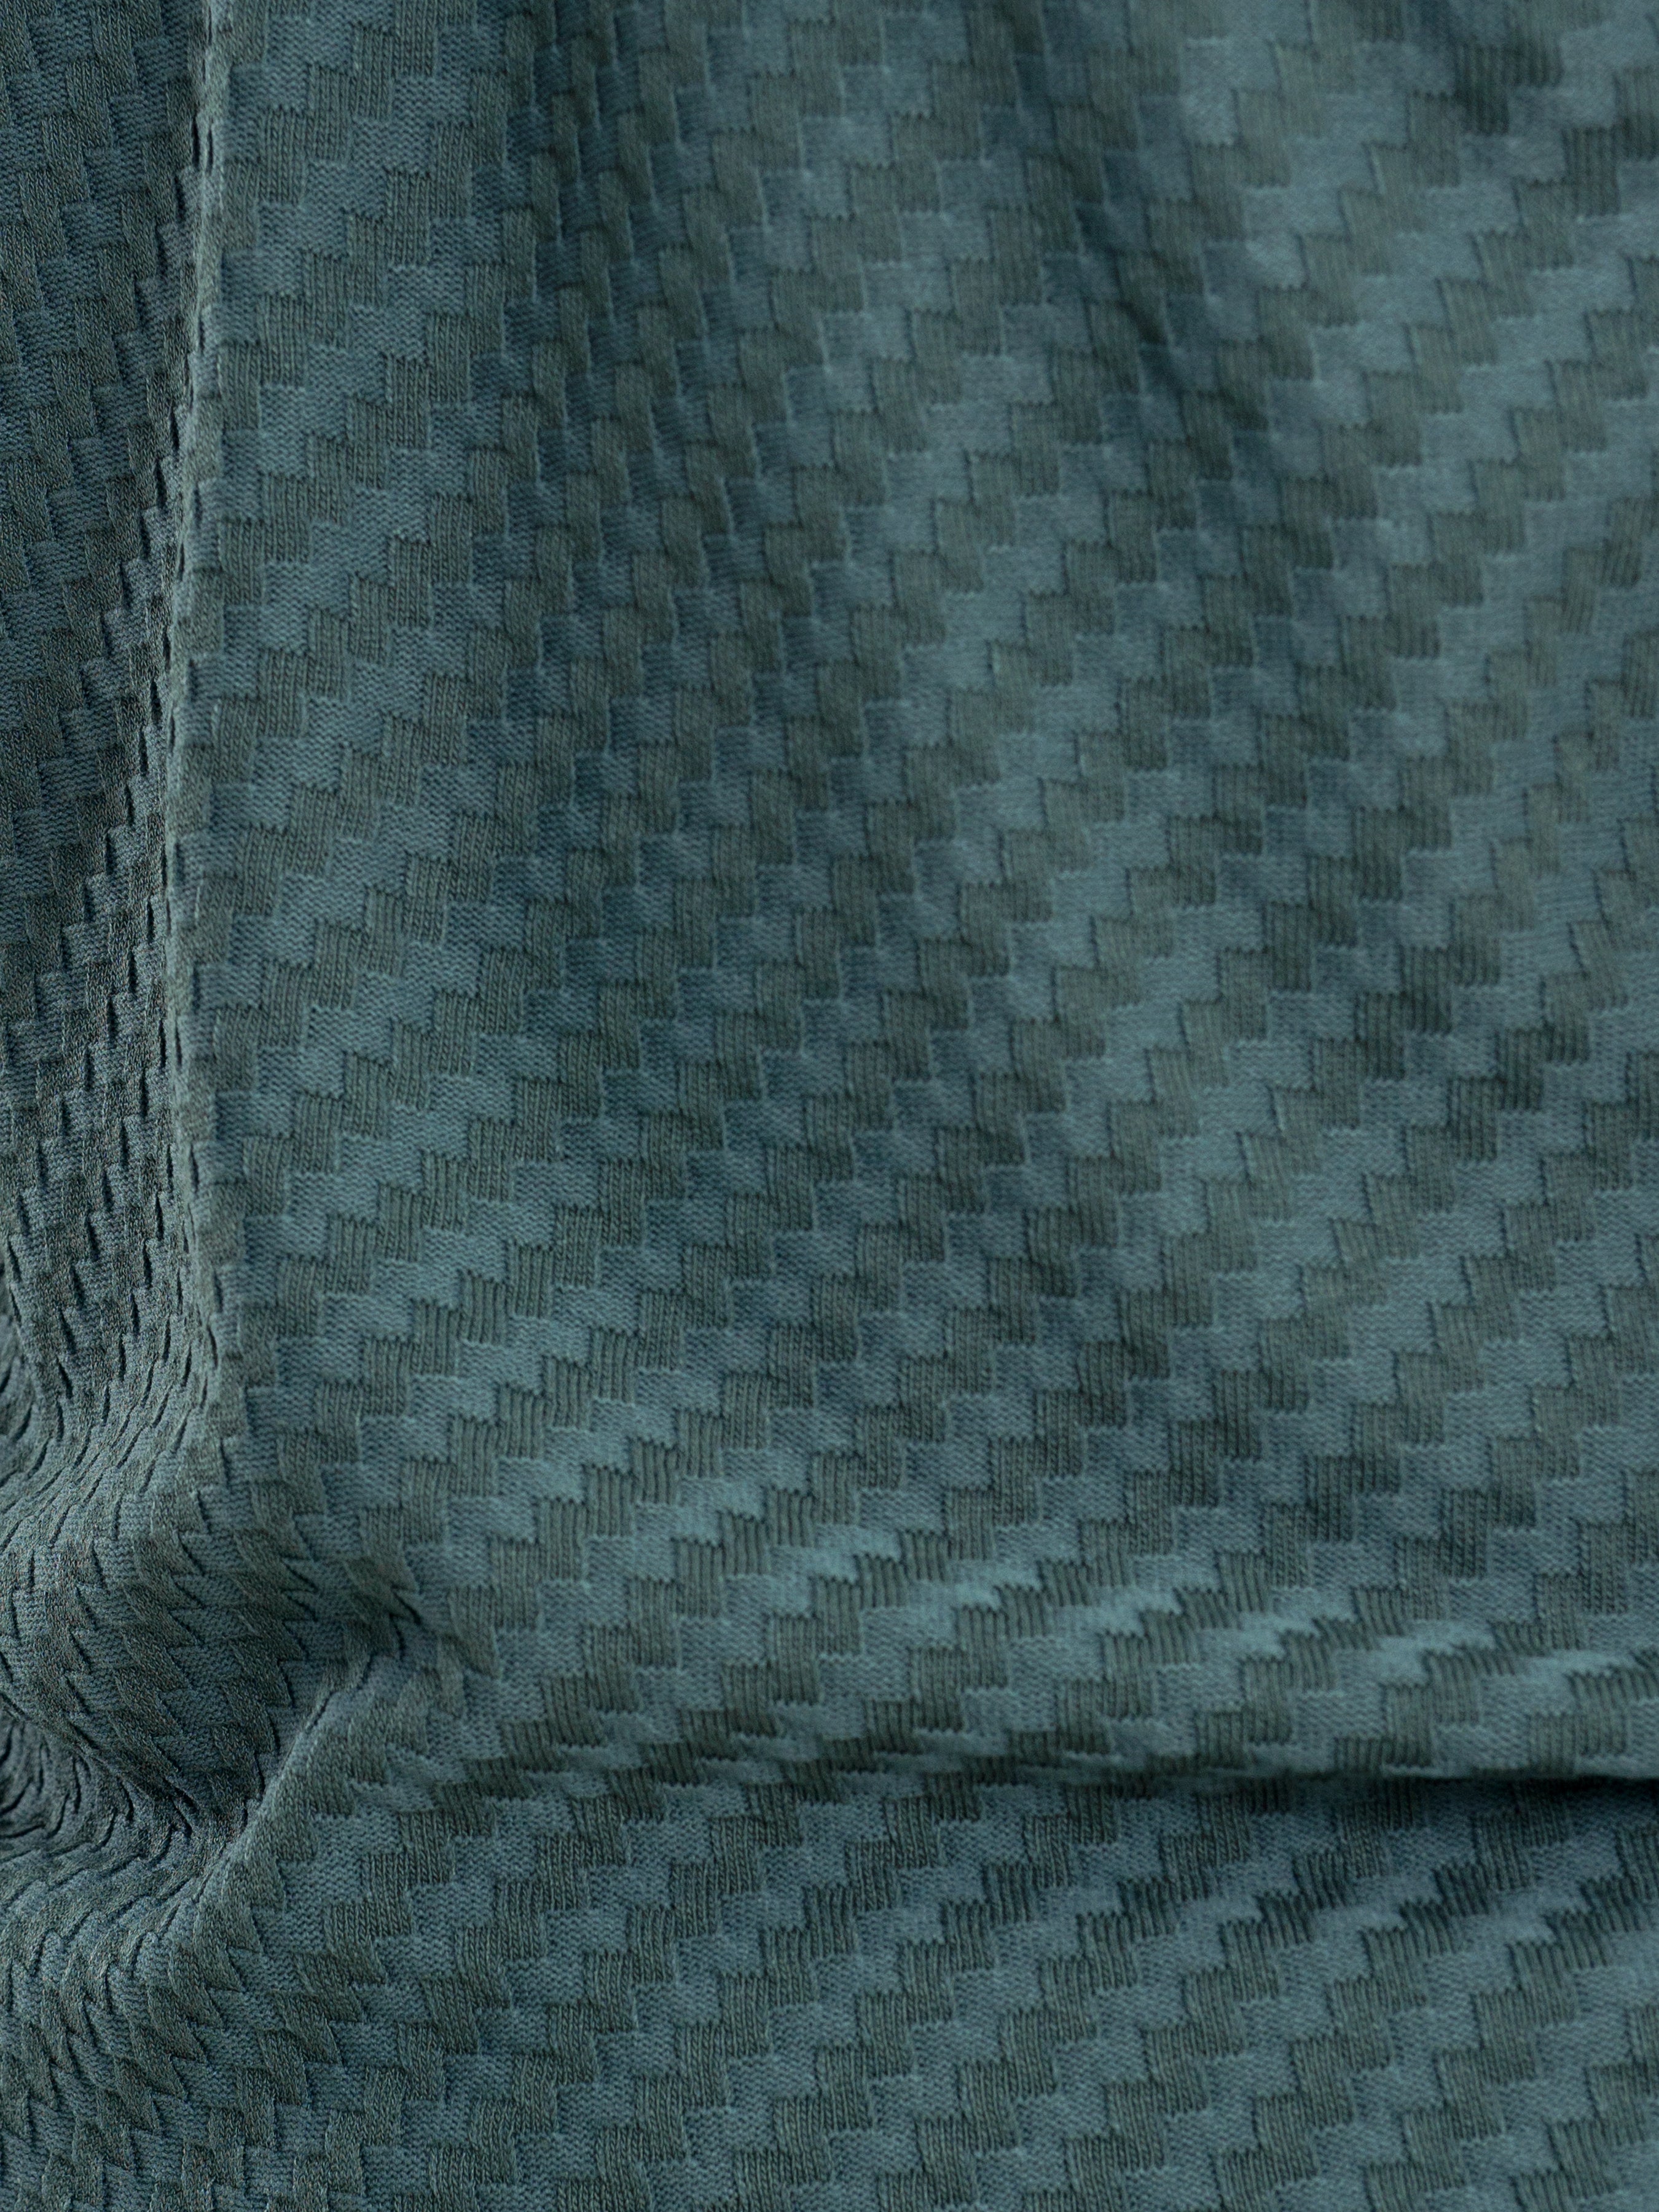 Basketweave Knit Polo Tee - Forest Green